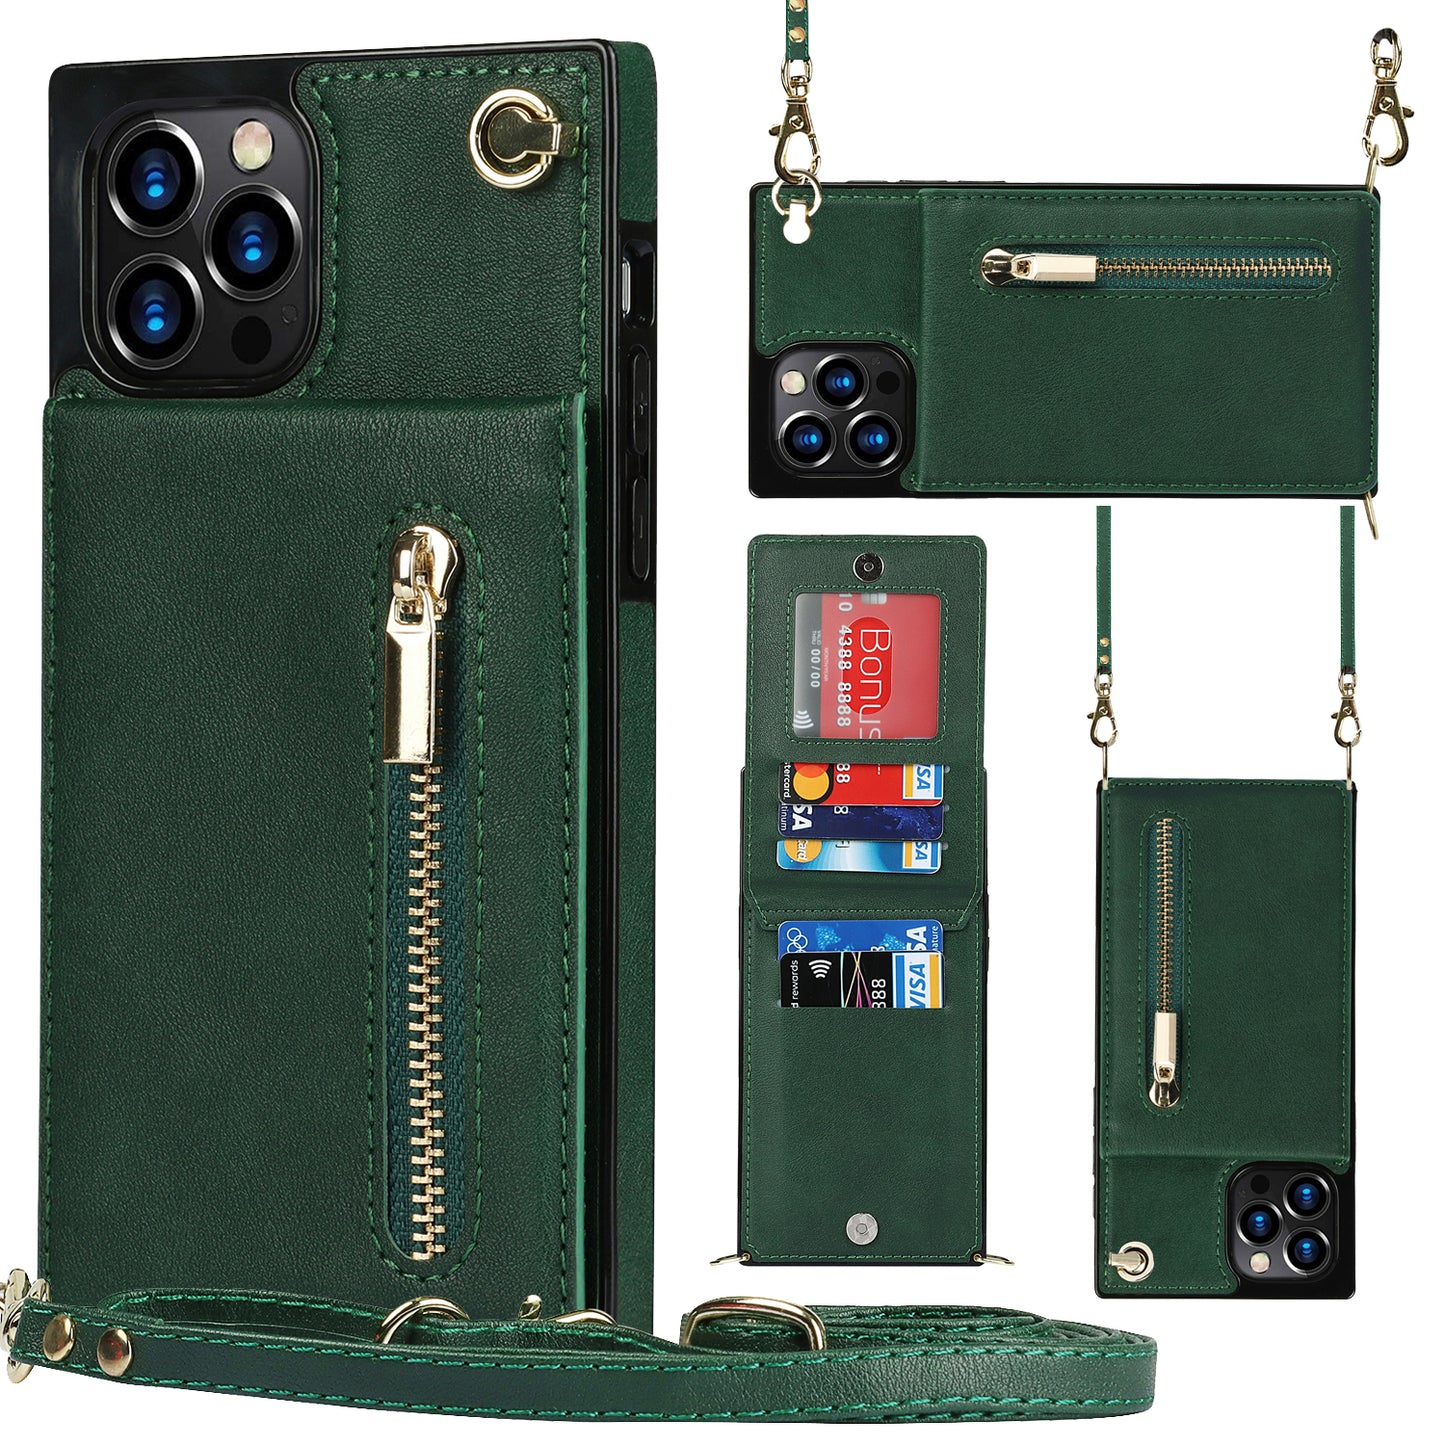 Apple iPhone 12 Pro Max Leather Cover with Classical Card Cash Slots Zipper Hand Shoulder Strap Kickstand